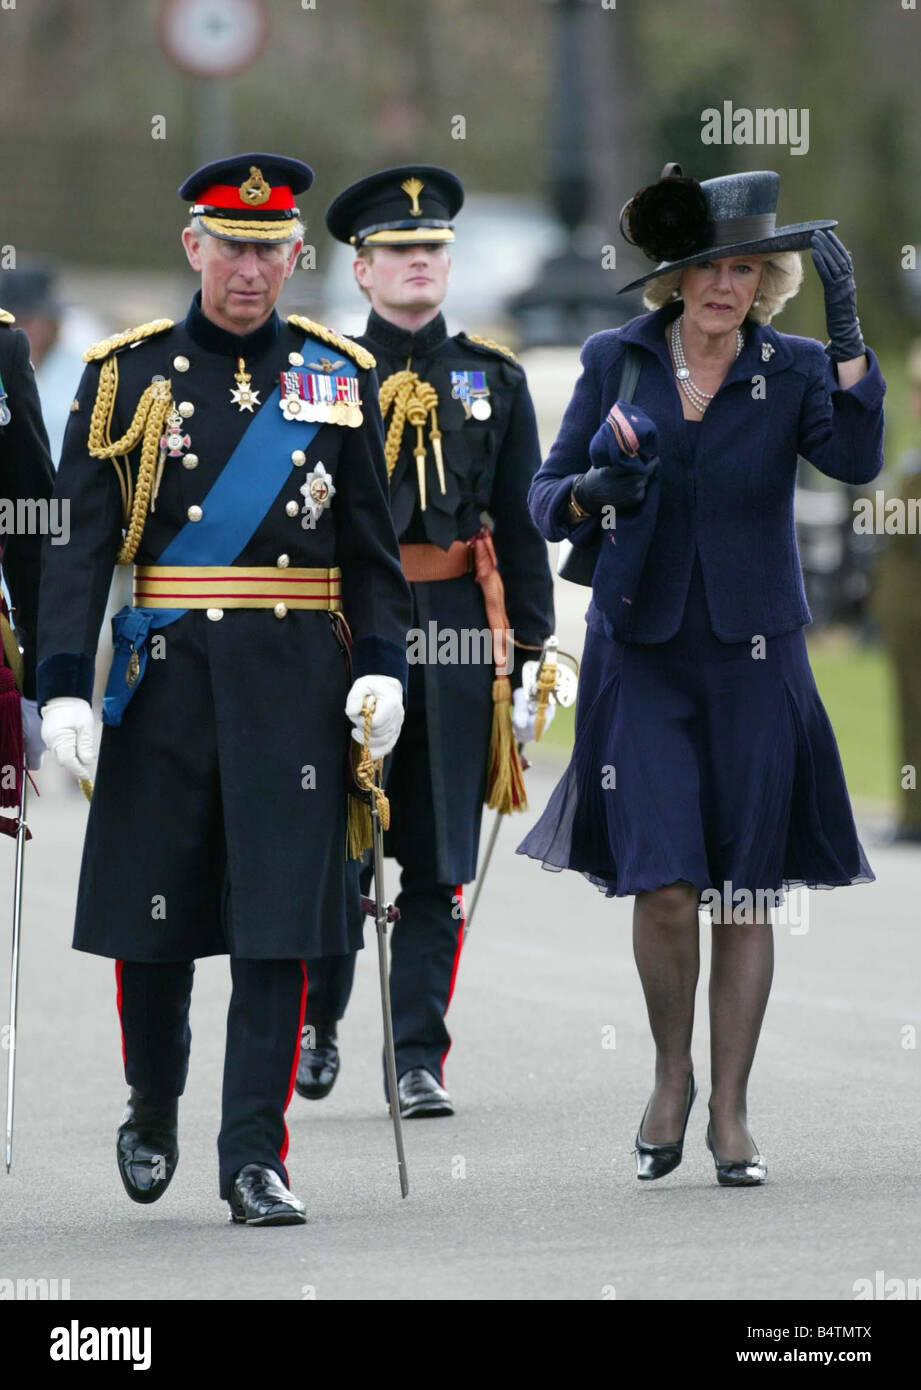 Prince Charles and Camilla attend The Sovereign s Parade at the Royal Military Academy at Sandhurst in Surrey Where Prince Harry was one of 220 cadets passing out and receiving their commissions into the British Army Stock Photo